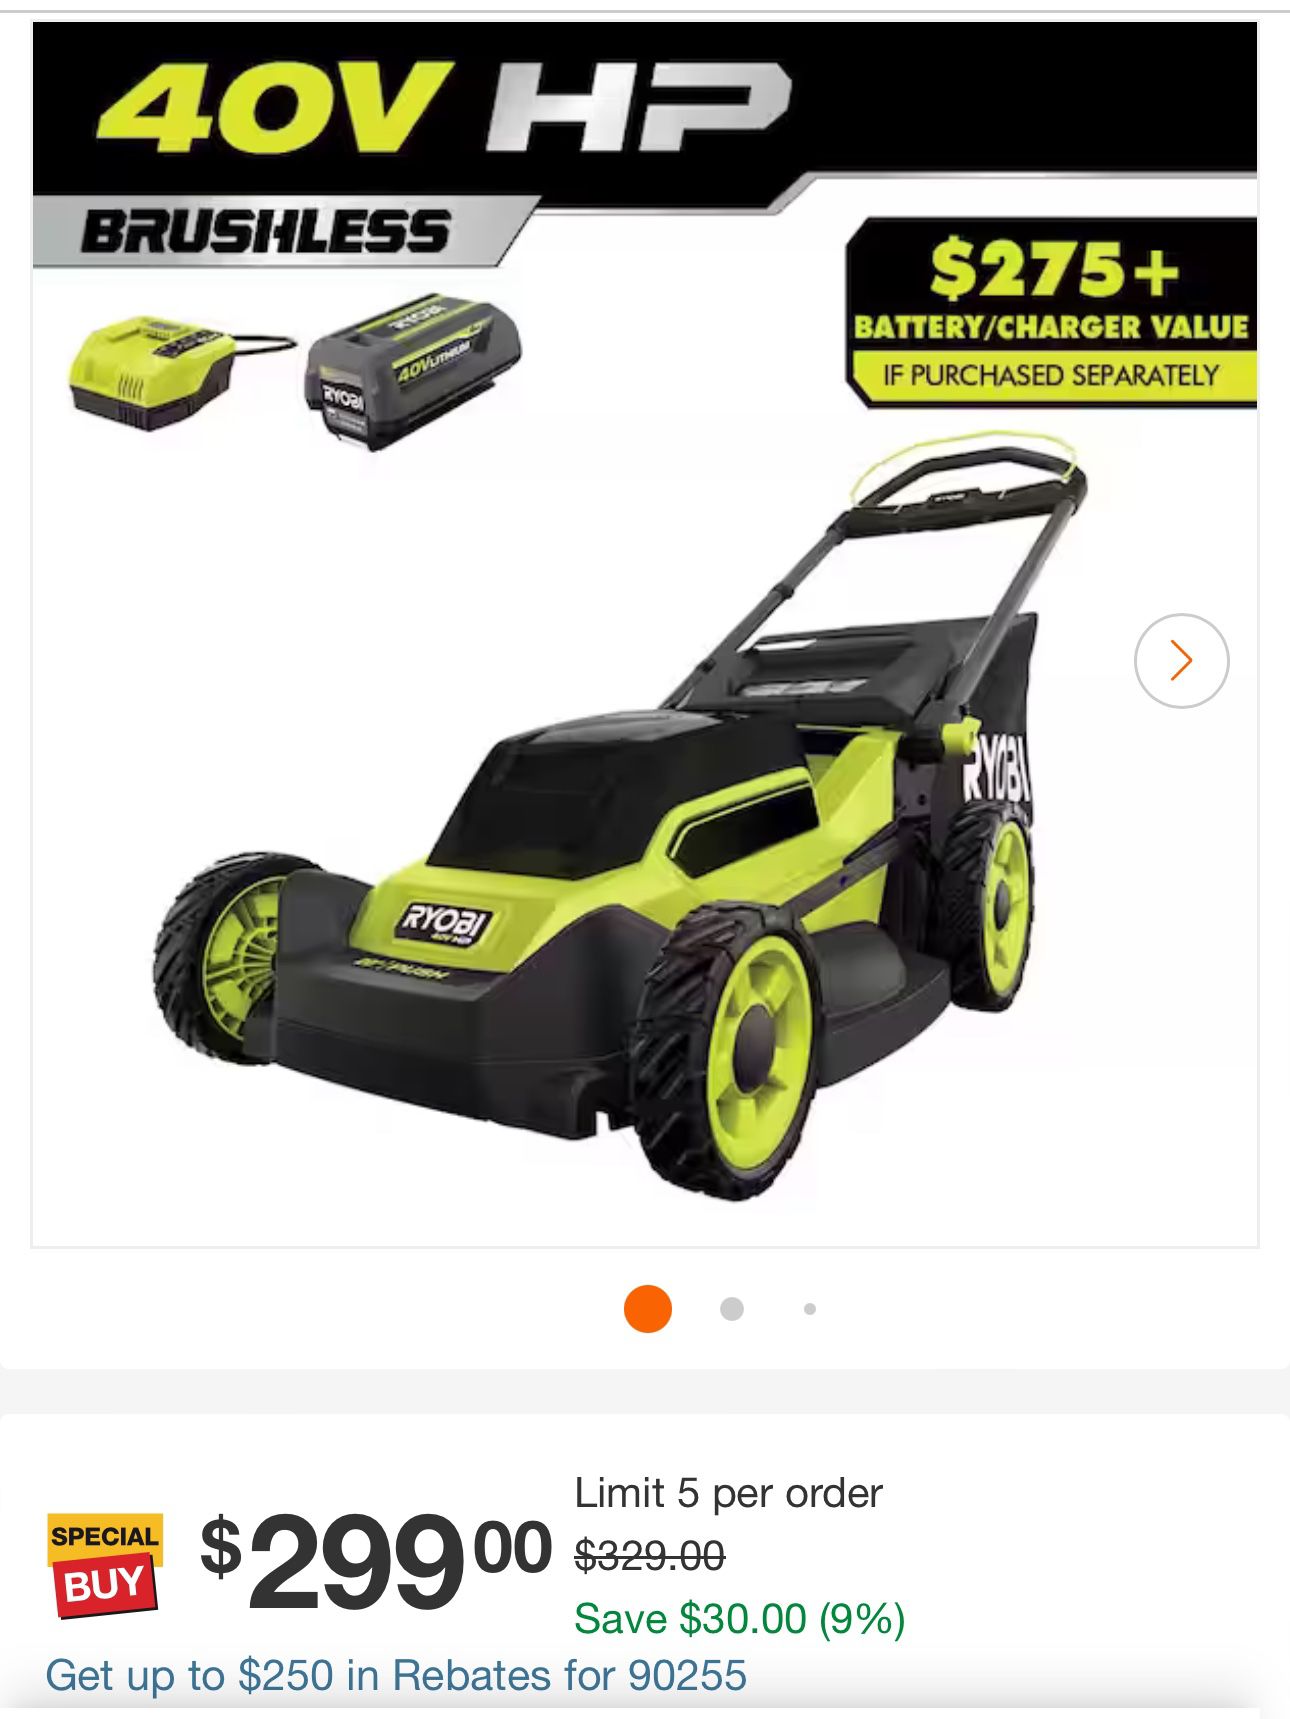 Lawn Mower With Battery